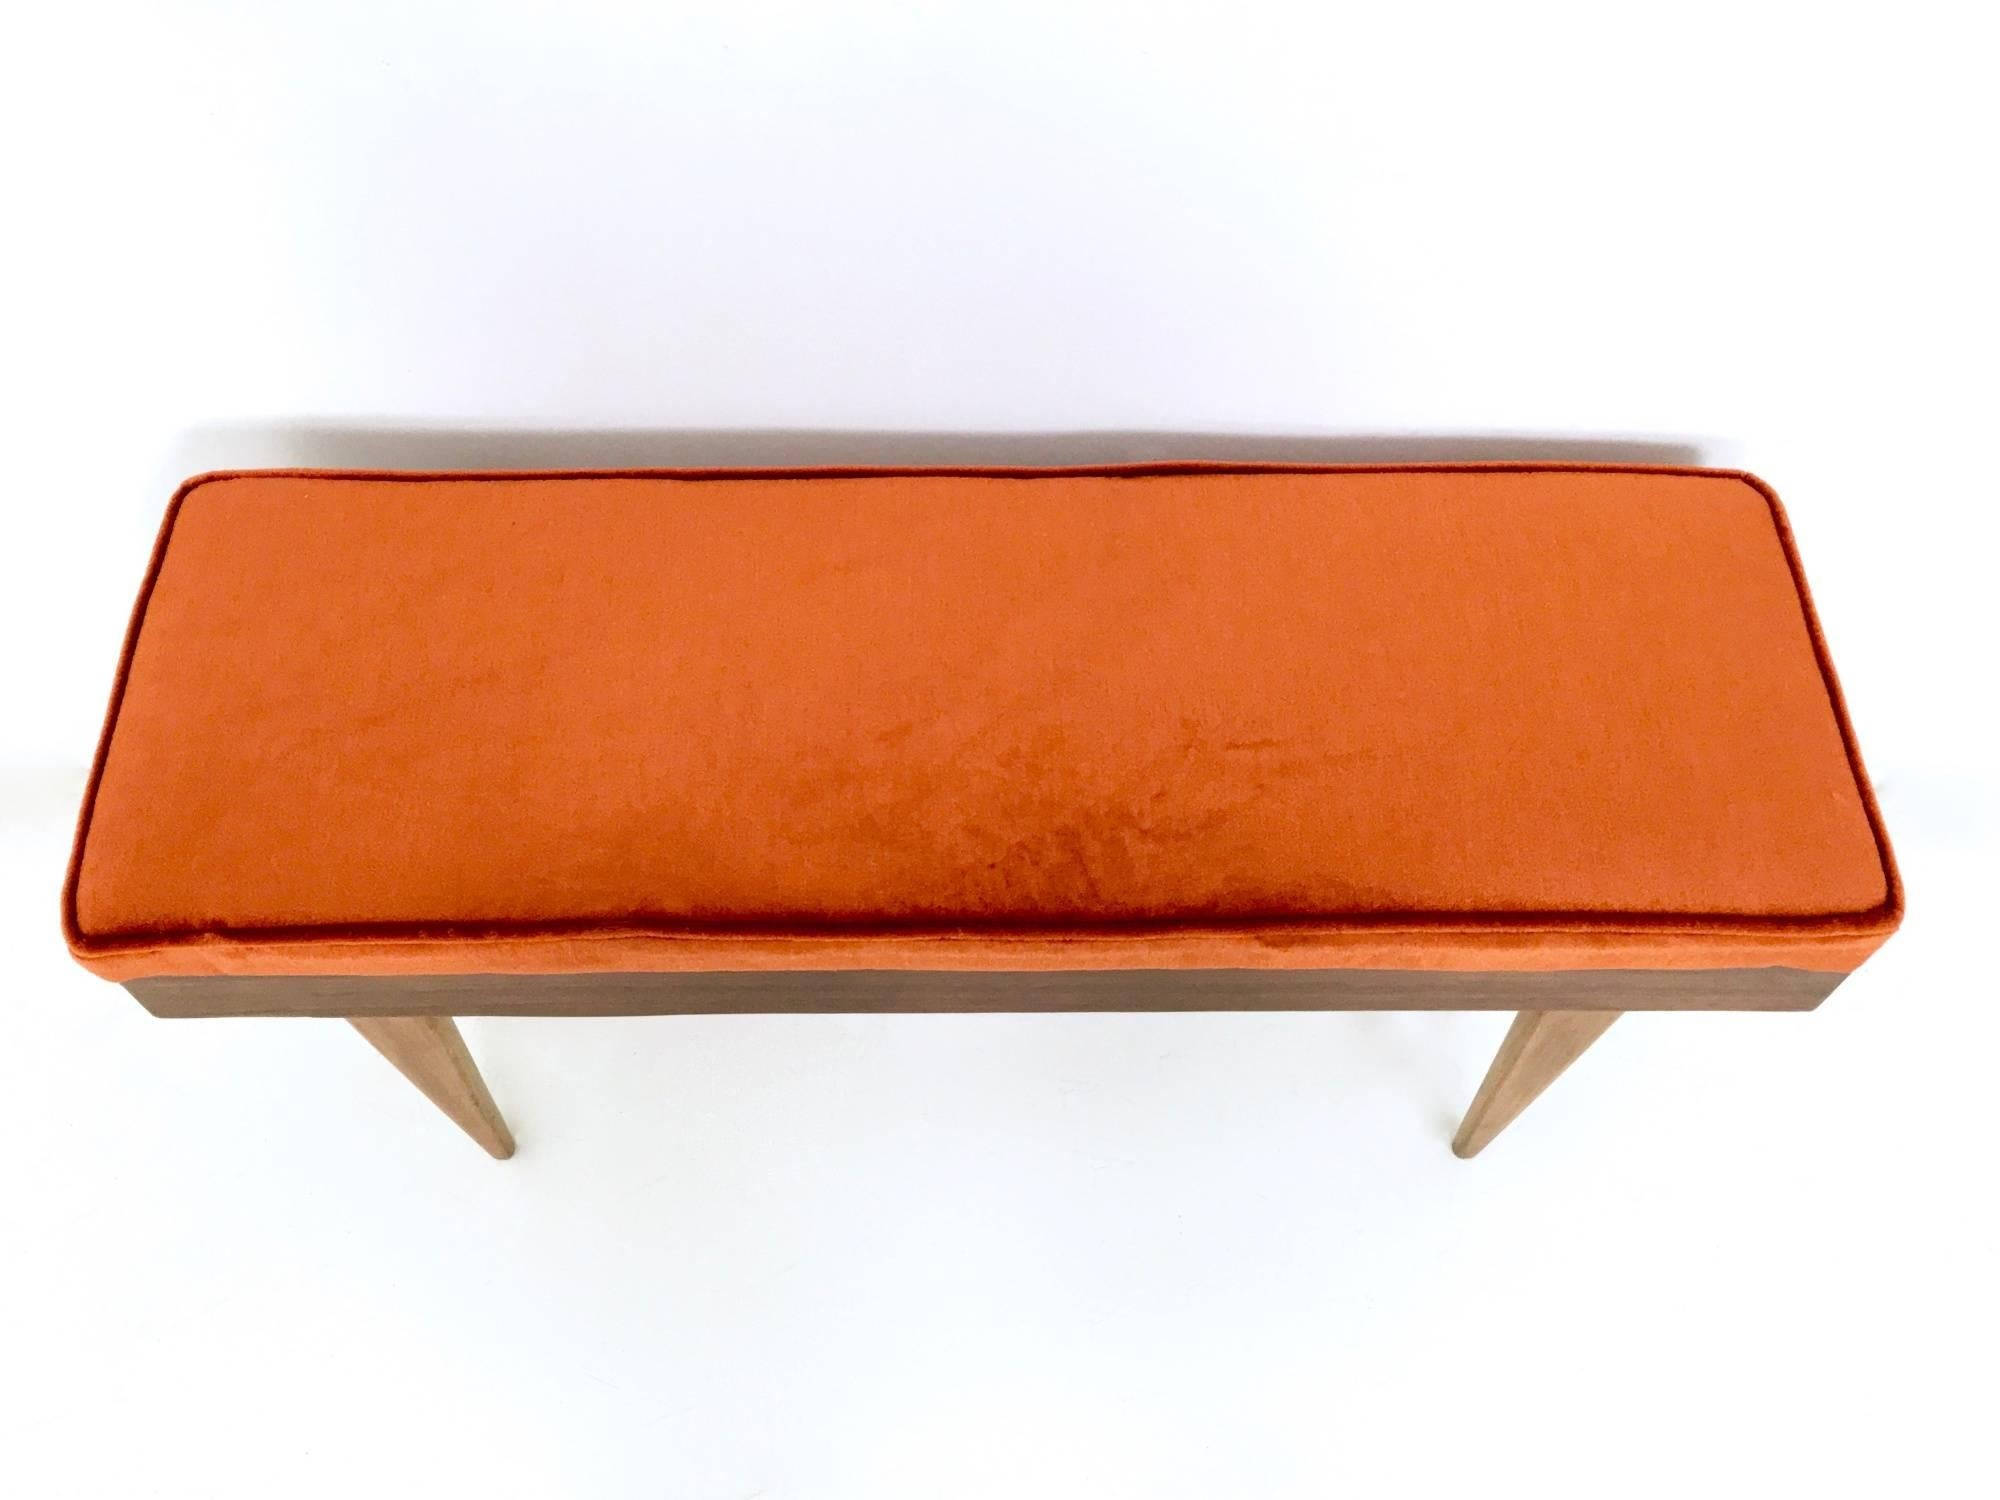 Italian Wooden Bench with Orange Fabric Upholstery, Italy, 1950s